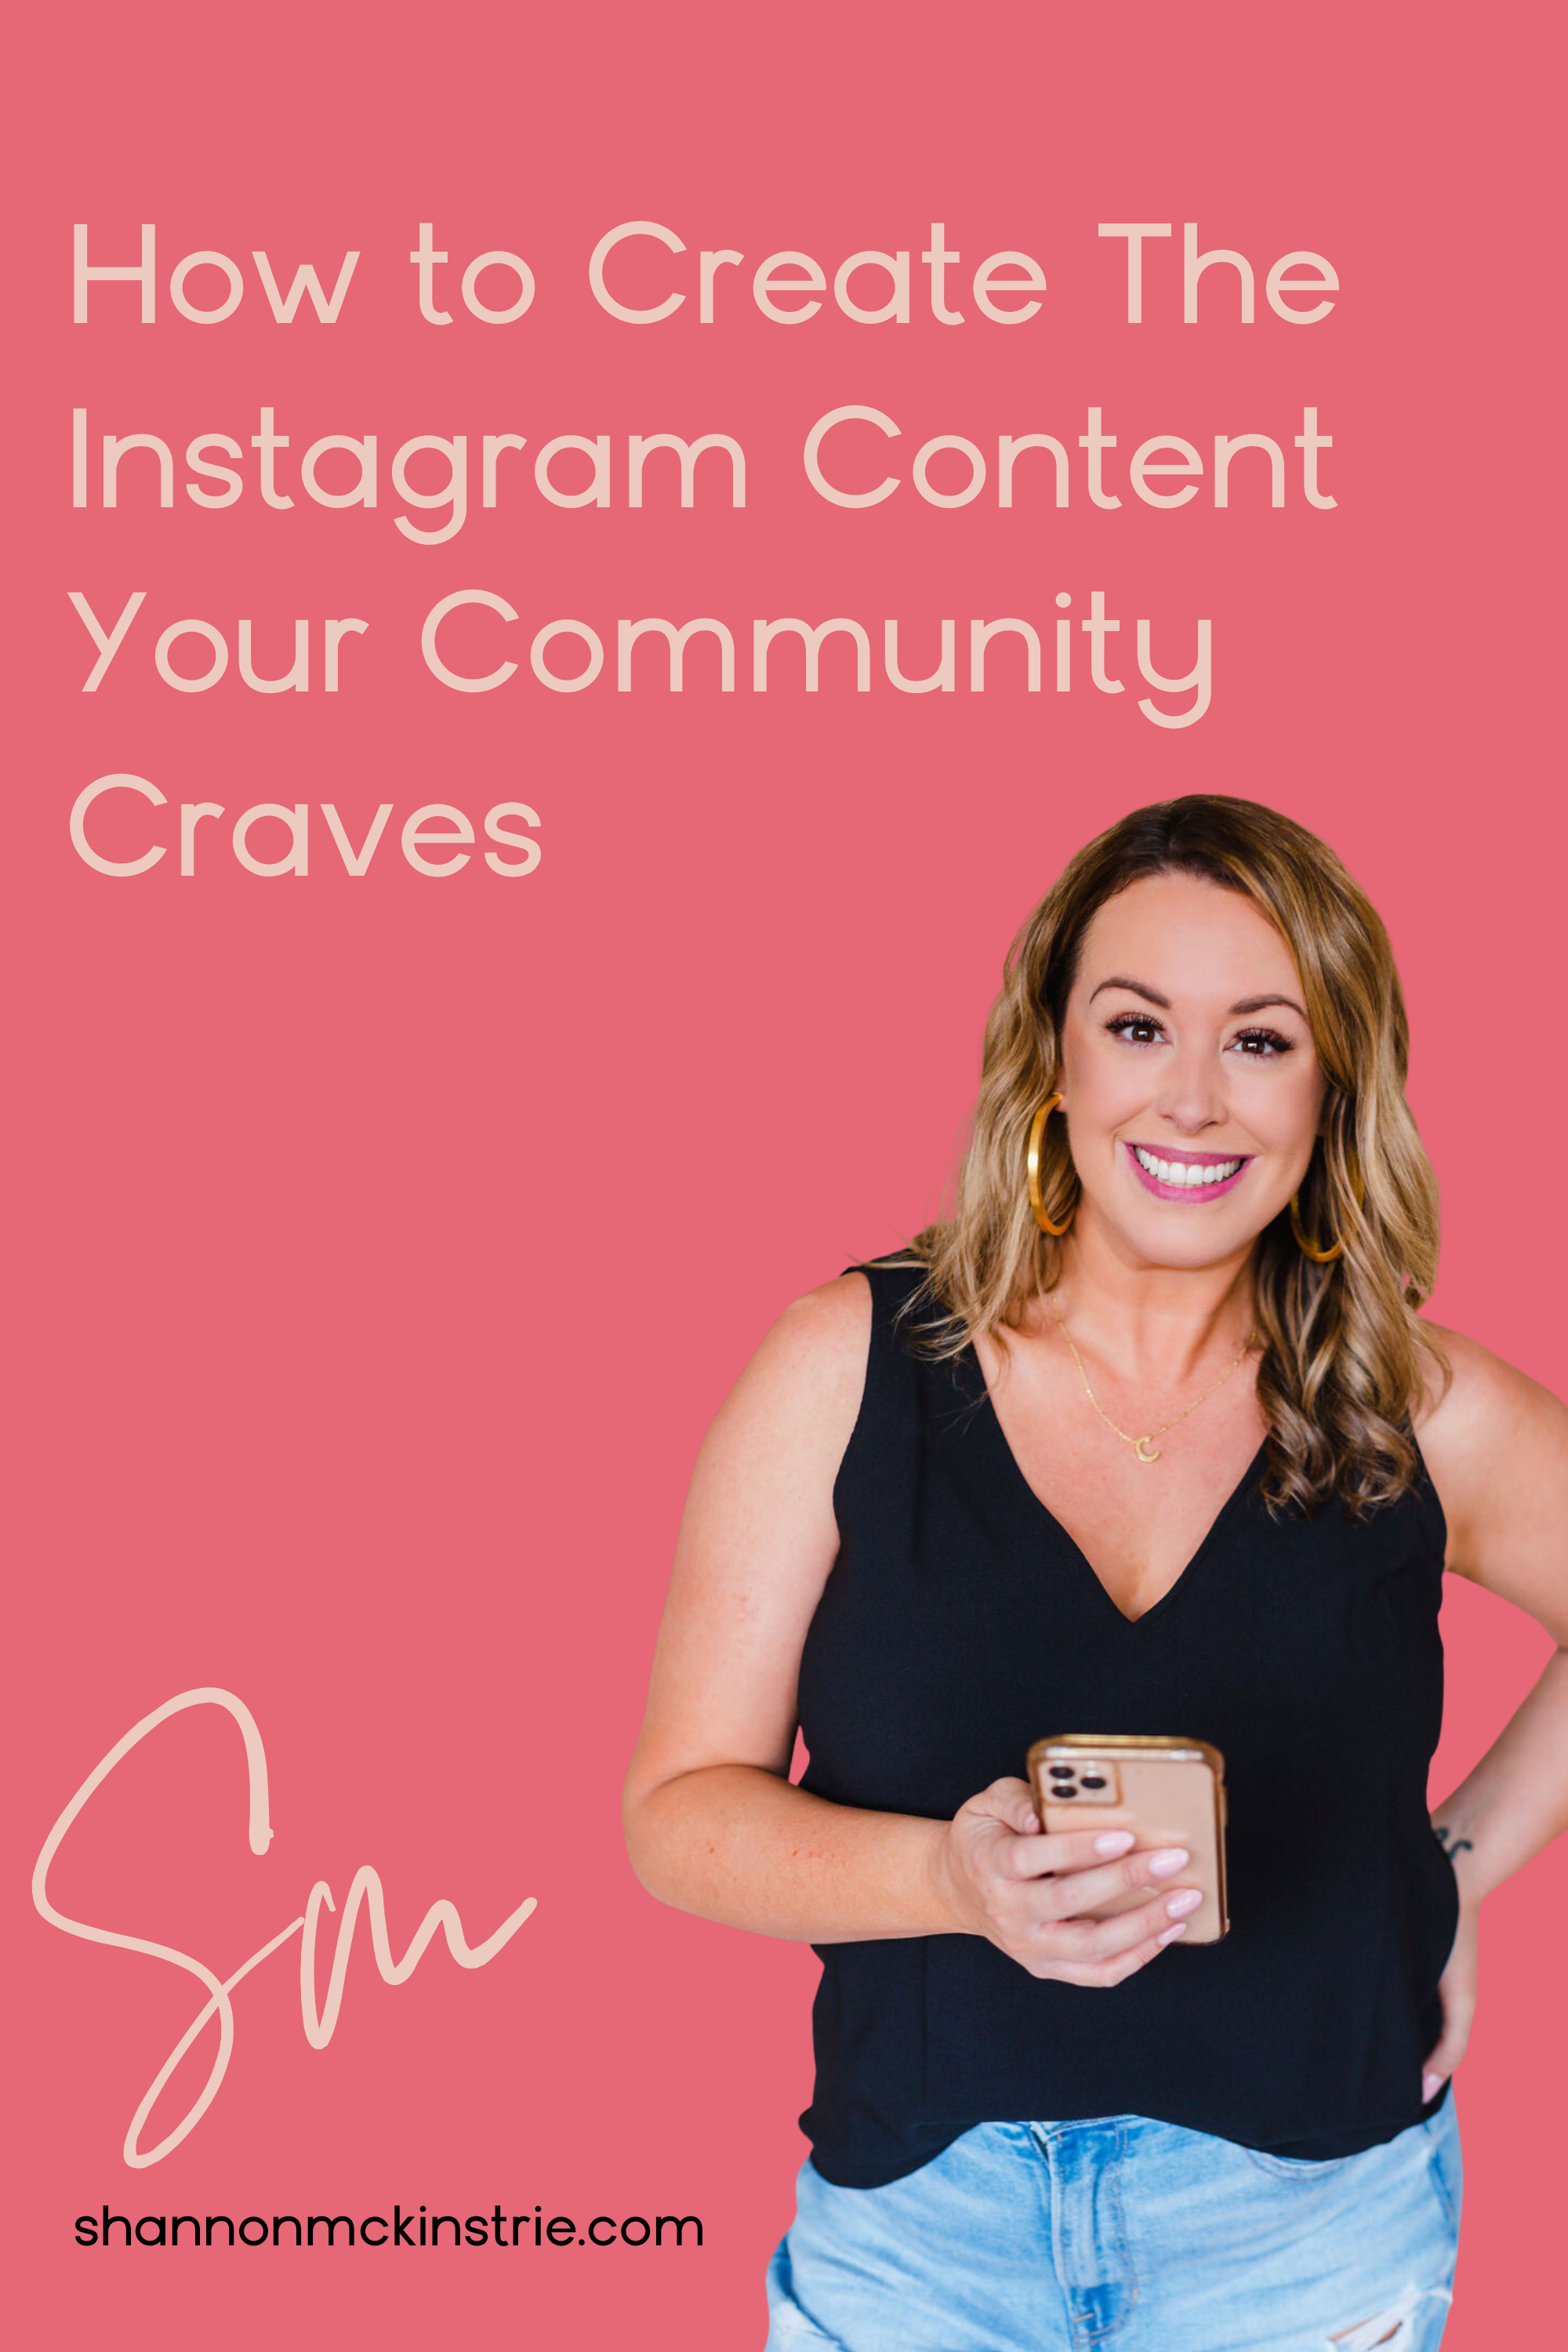 a photo of social media coach shannon mckinstrie with the text: "how to create the instagram content your community craves"